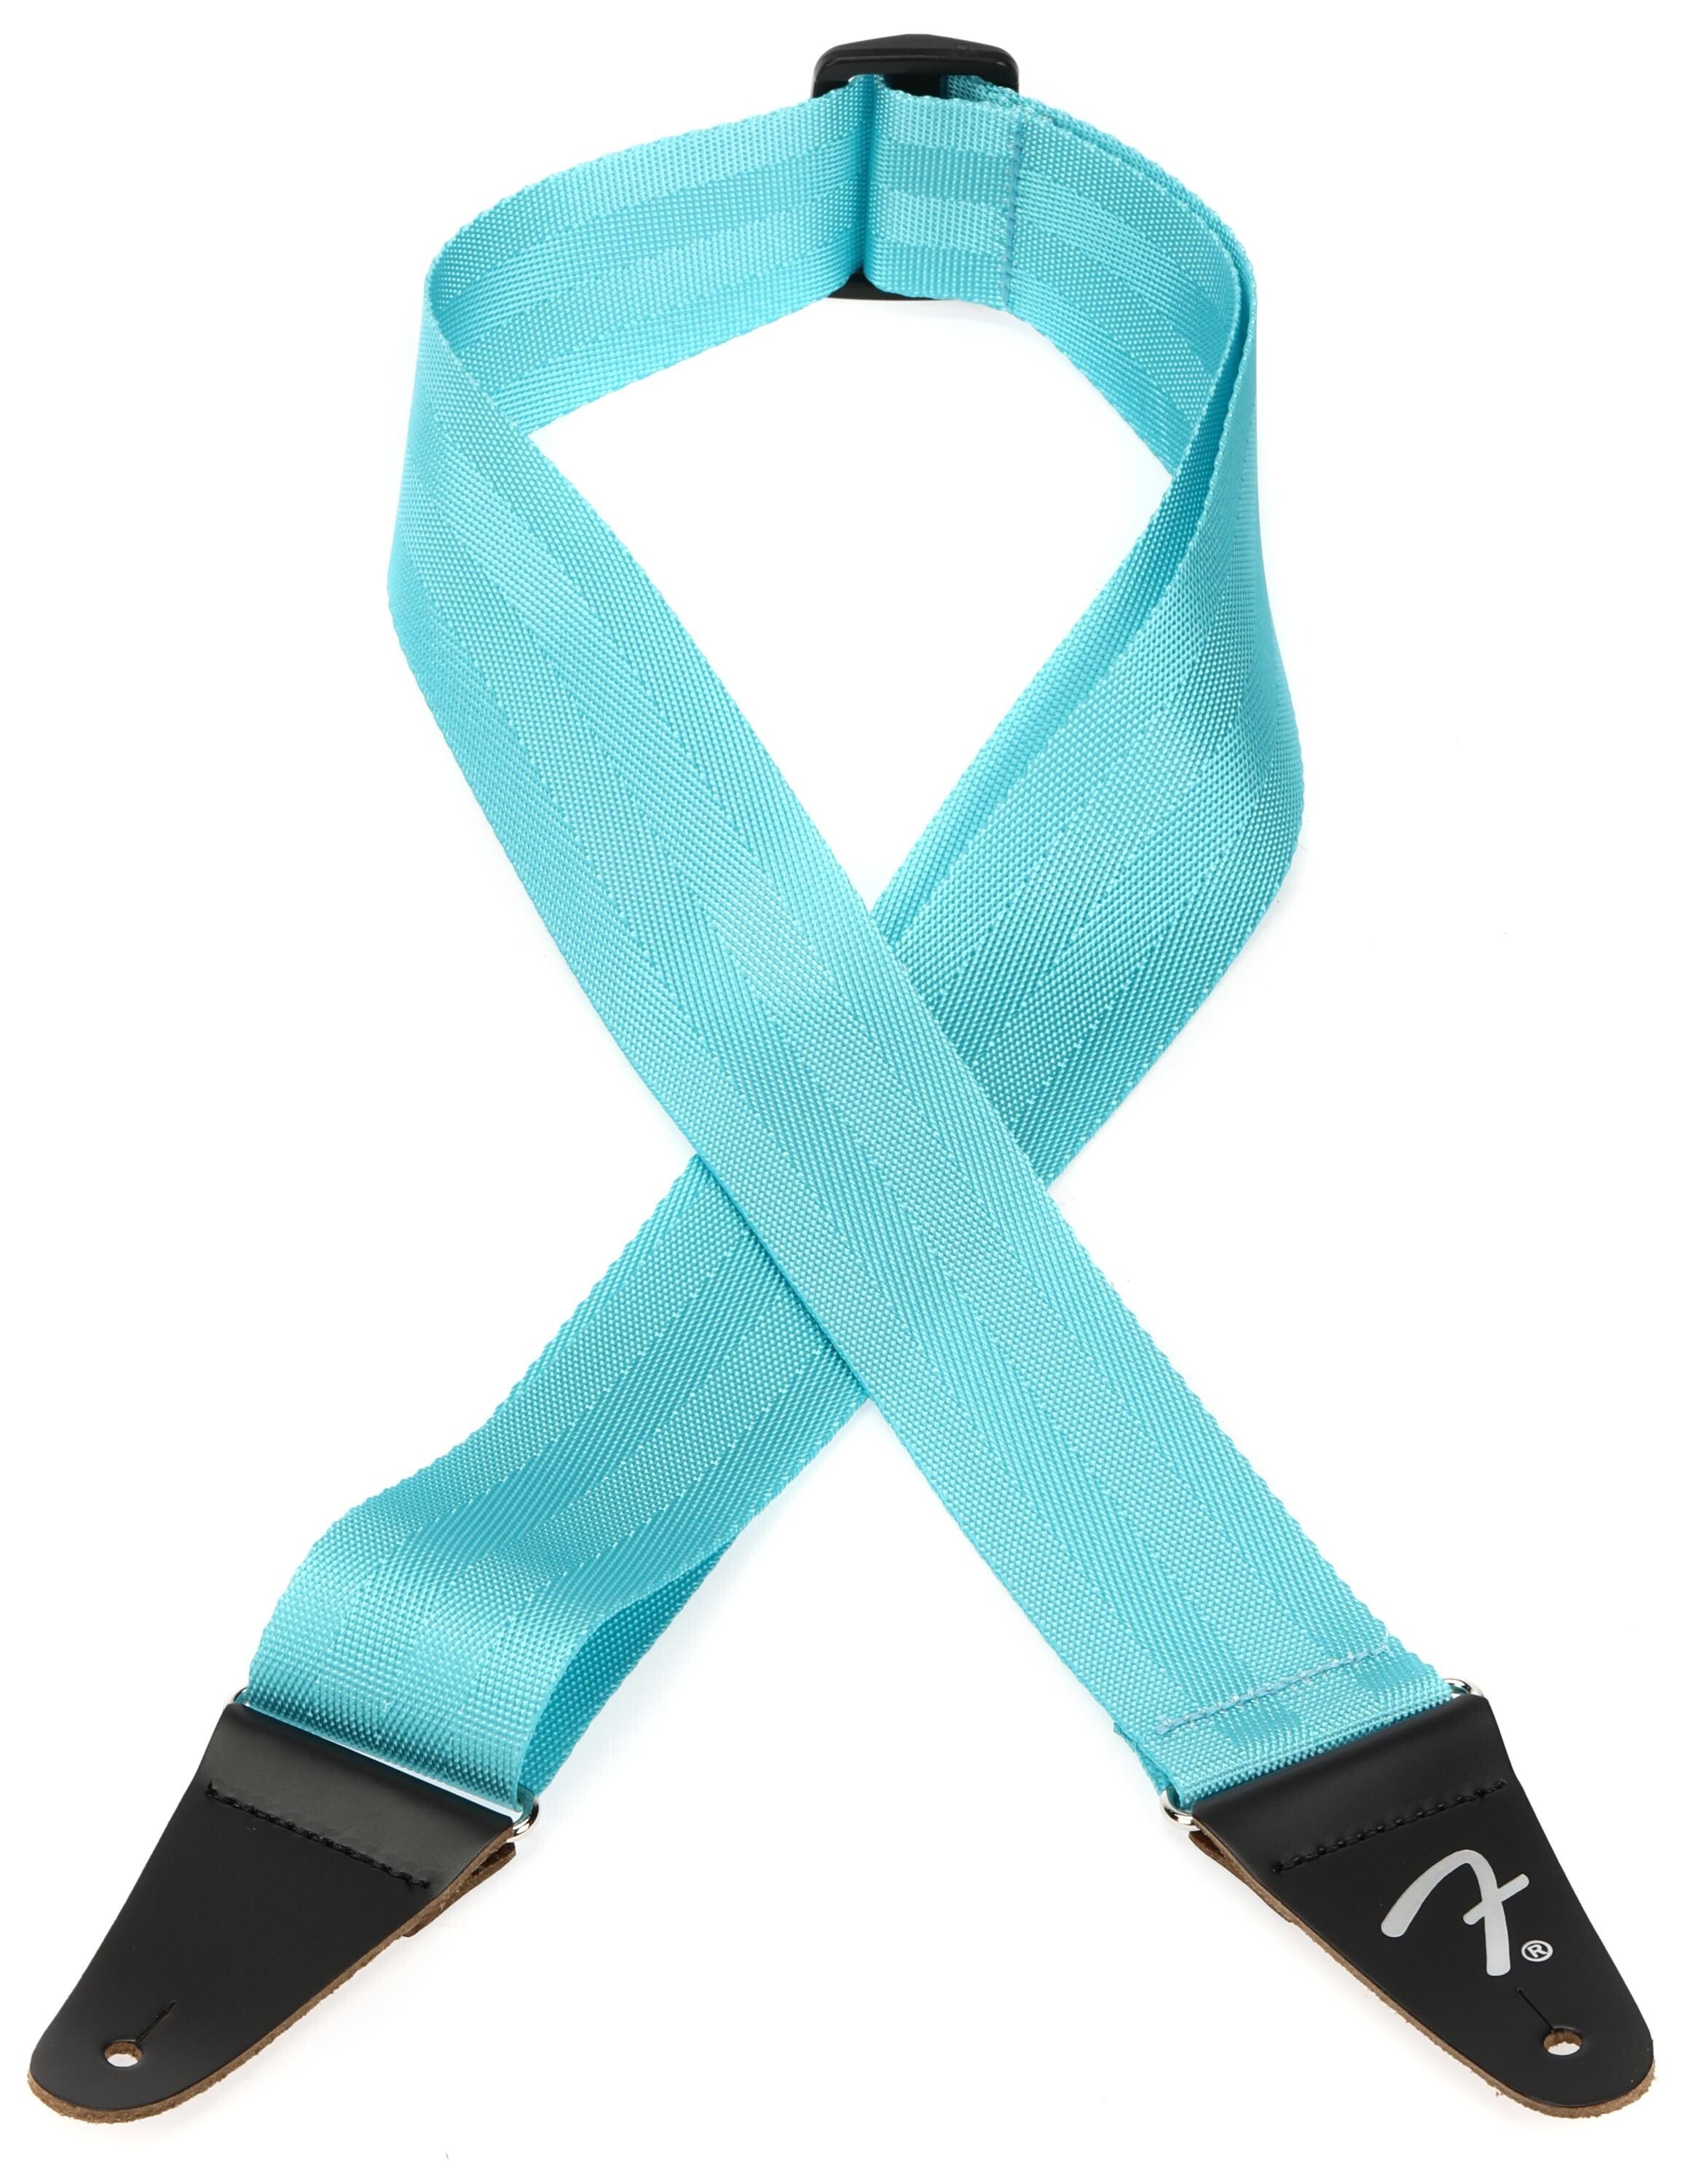 Fender American Professional Seat Belt Strap - Miami Blue | Sweetwater